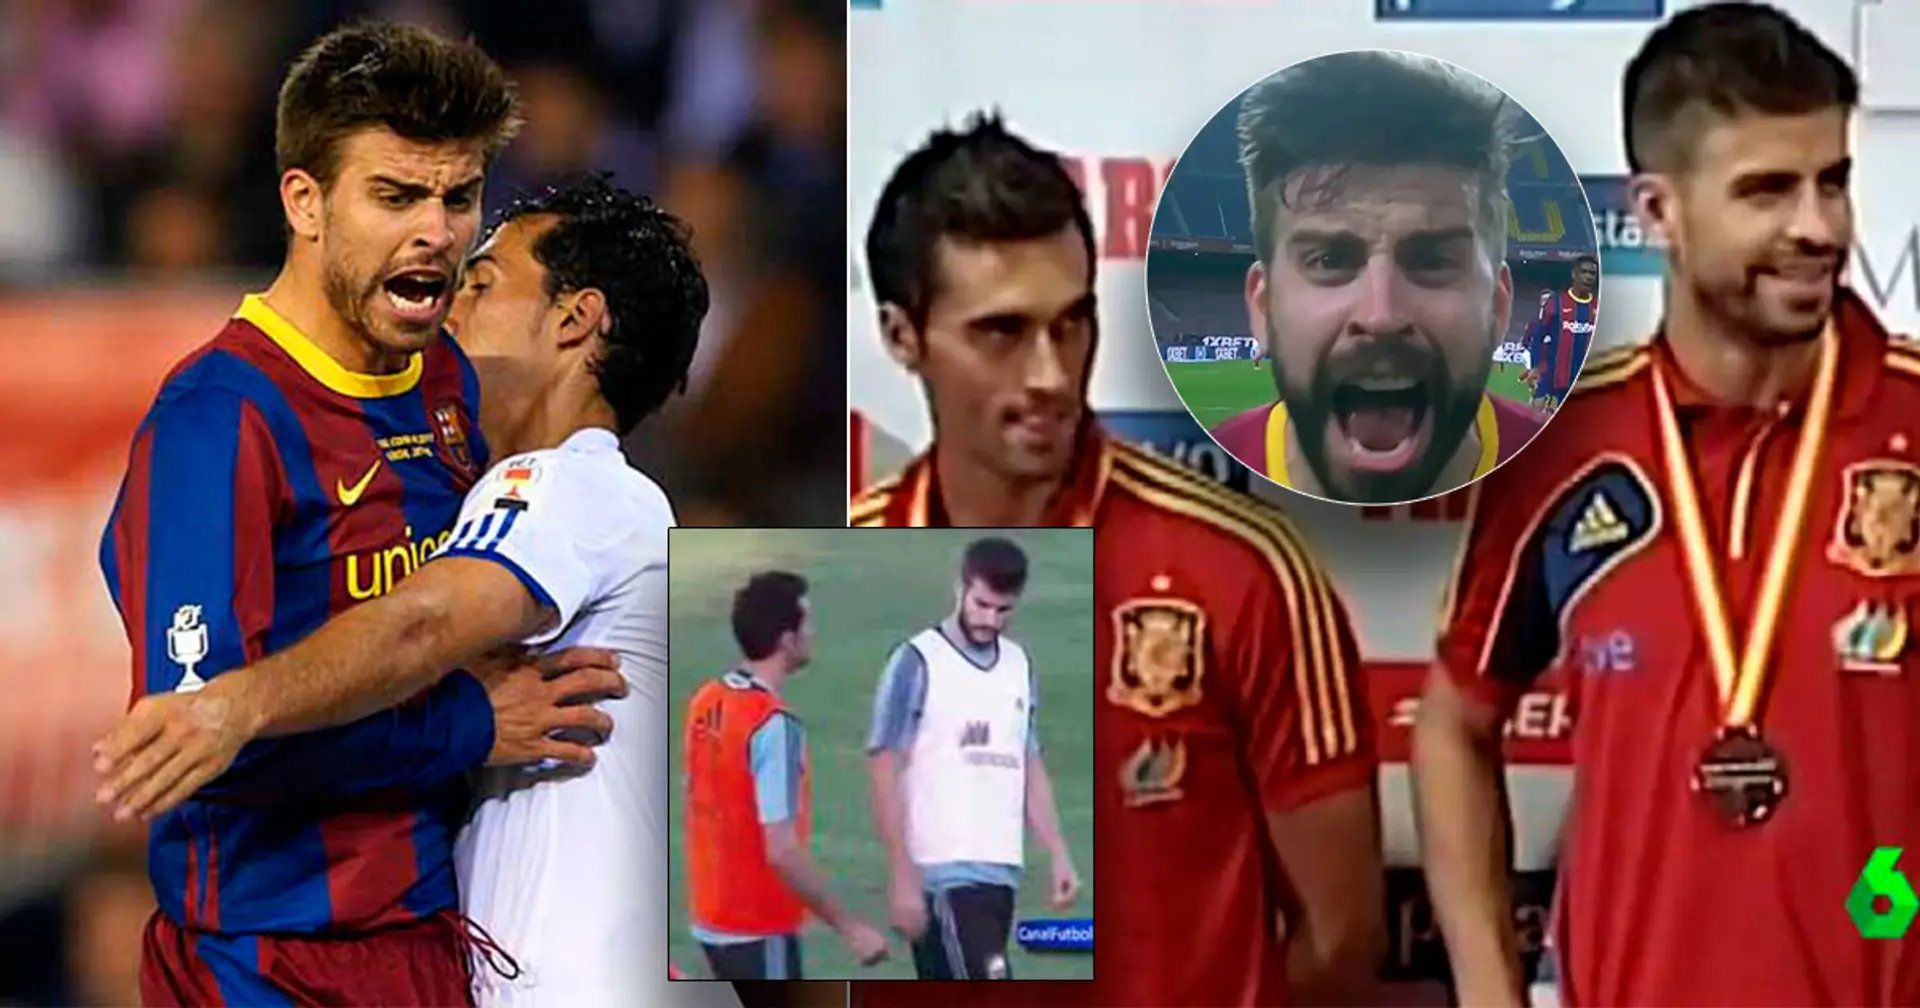 'He's nothing more than an acquaintance': What happened between Arbeloa and Pique that made them hate each other